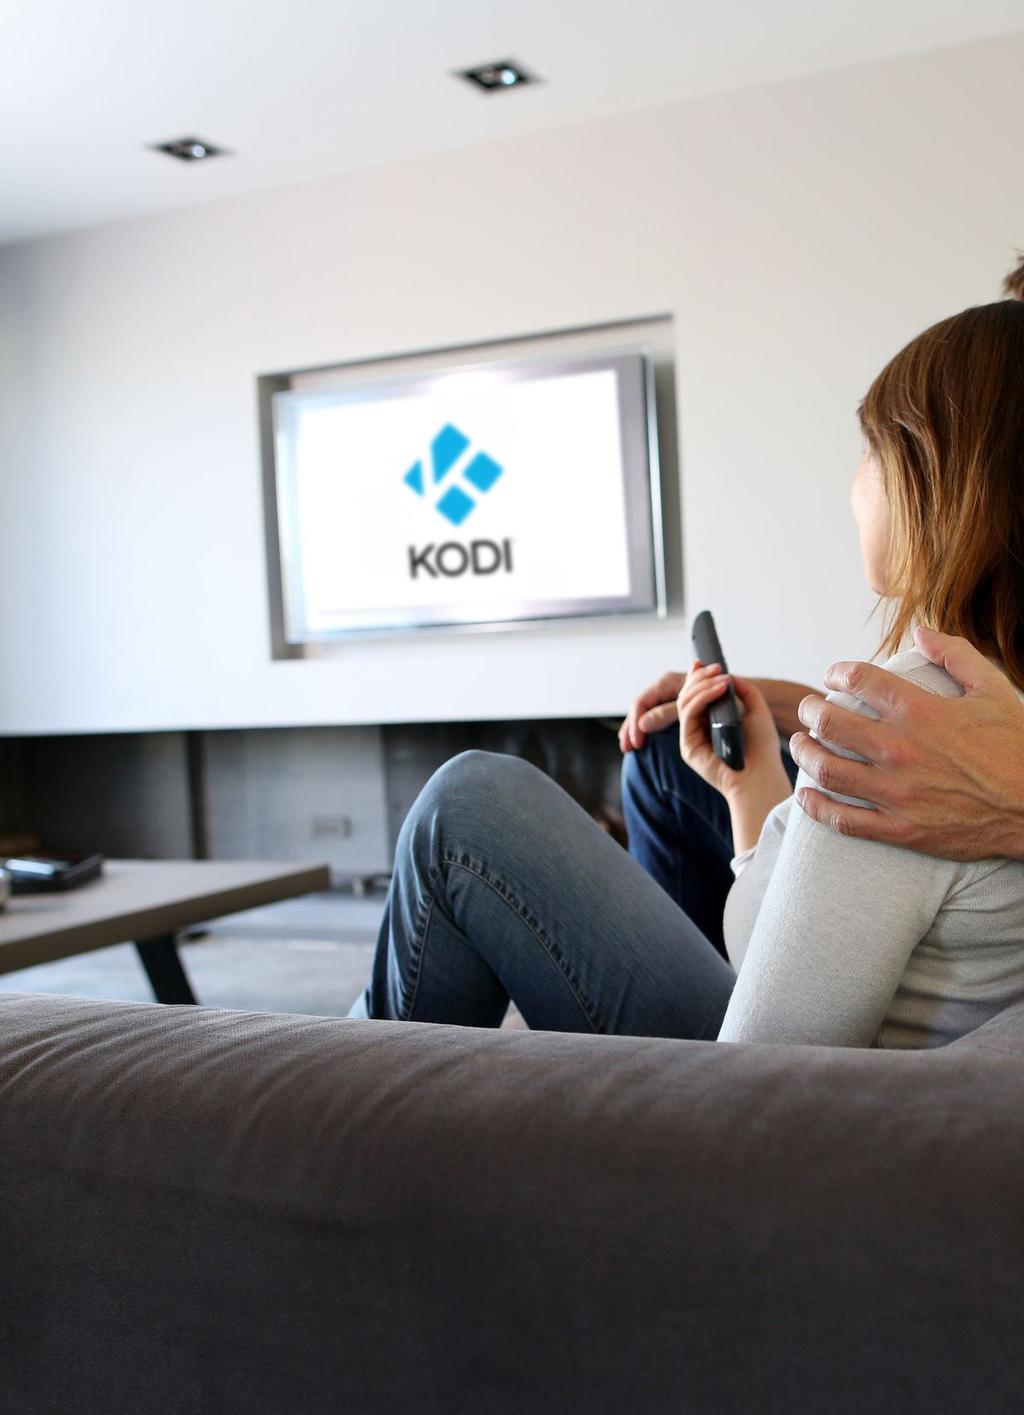 XBMC/Kodi WeTek Play comes with XBMC/Kodi which is preinstalled. It is shipped from factory with XBMC 13.2 Gotham version preinstalled in WeTek Android.